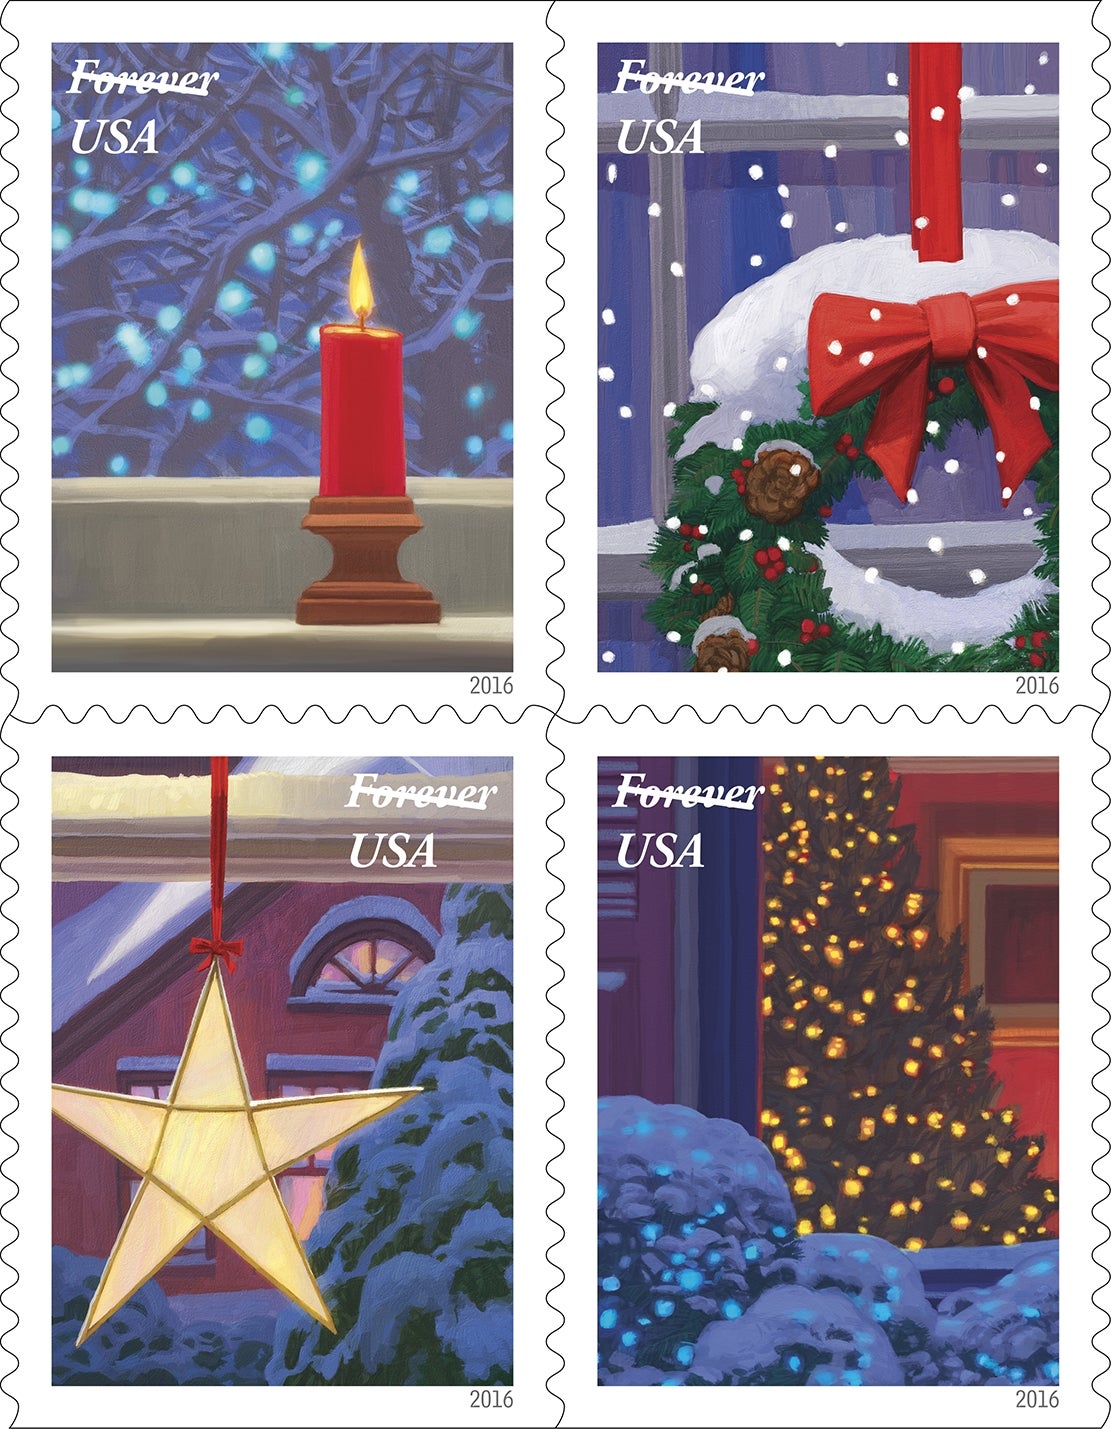 Poinsettia global forever stamp to be issued on a Sunday